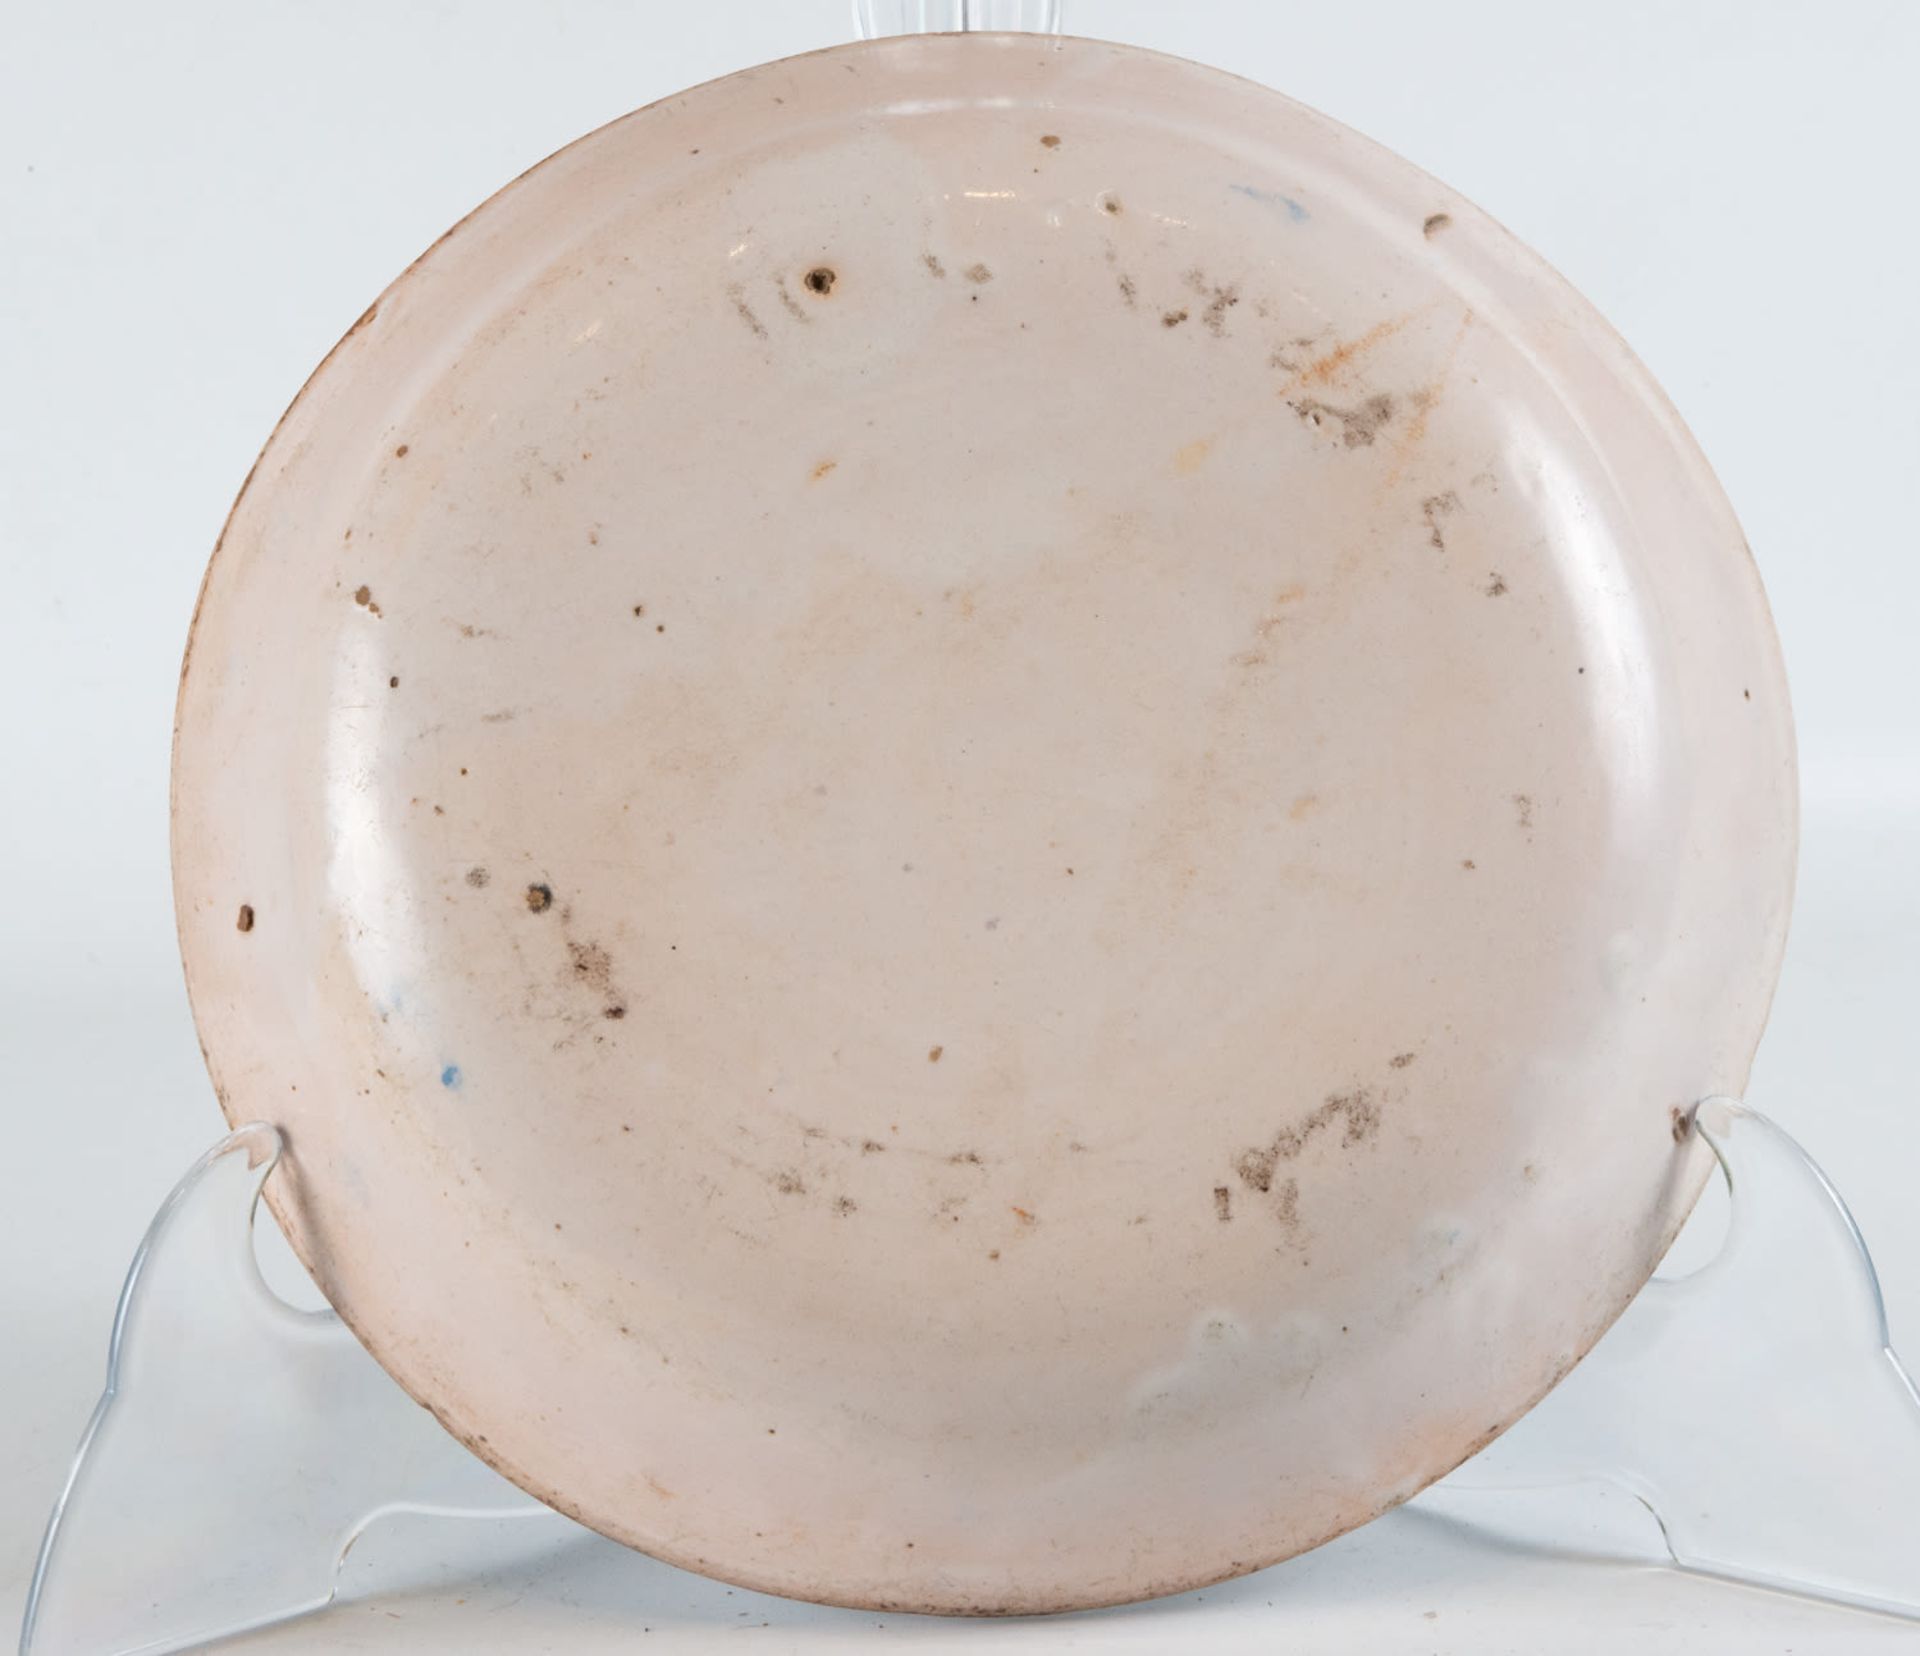 Ceramic plate from Manises, 19th century - Image 3 of 3